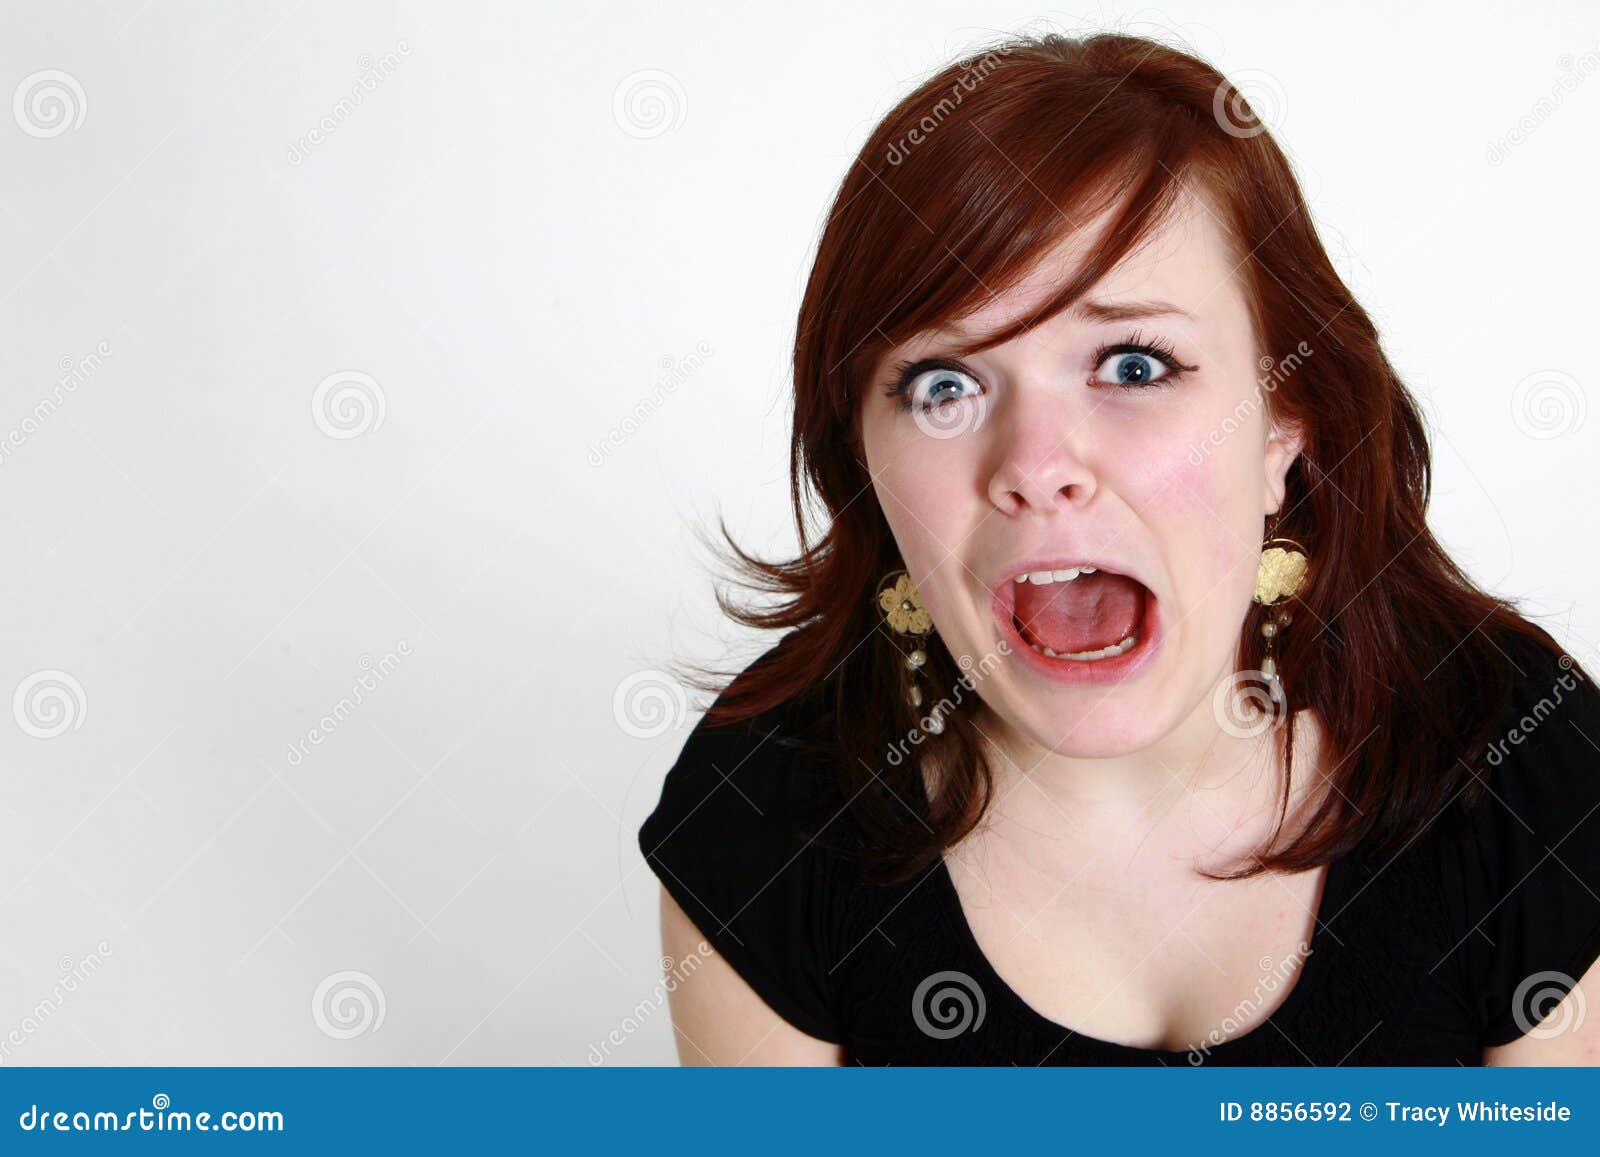 Distressed Teen Girl Stock Photo Image Of Facial Redhead 8856592